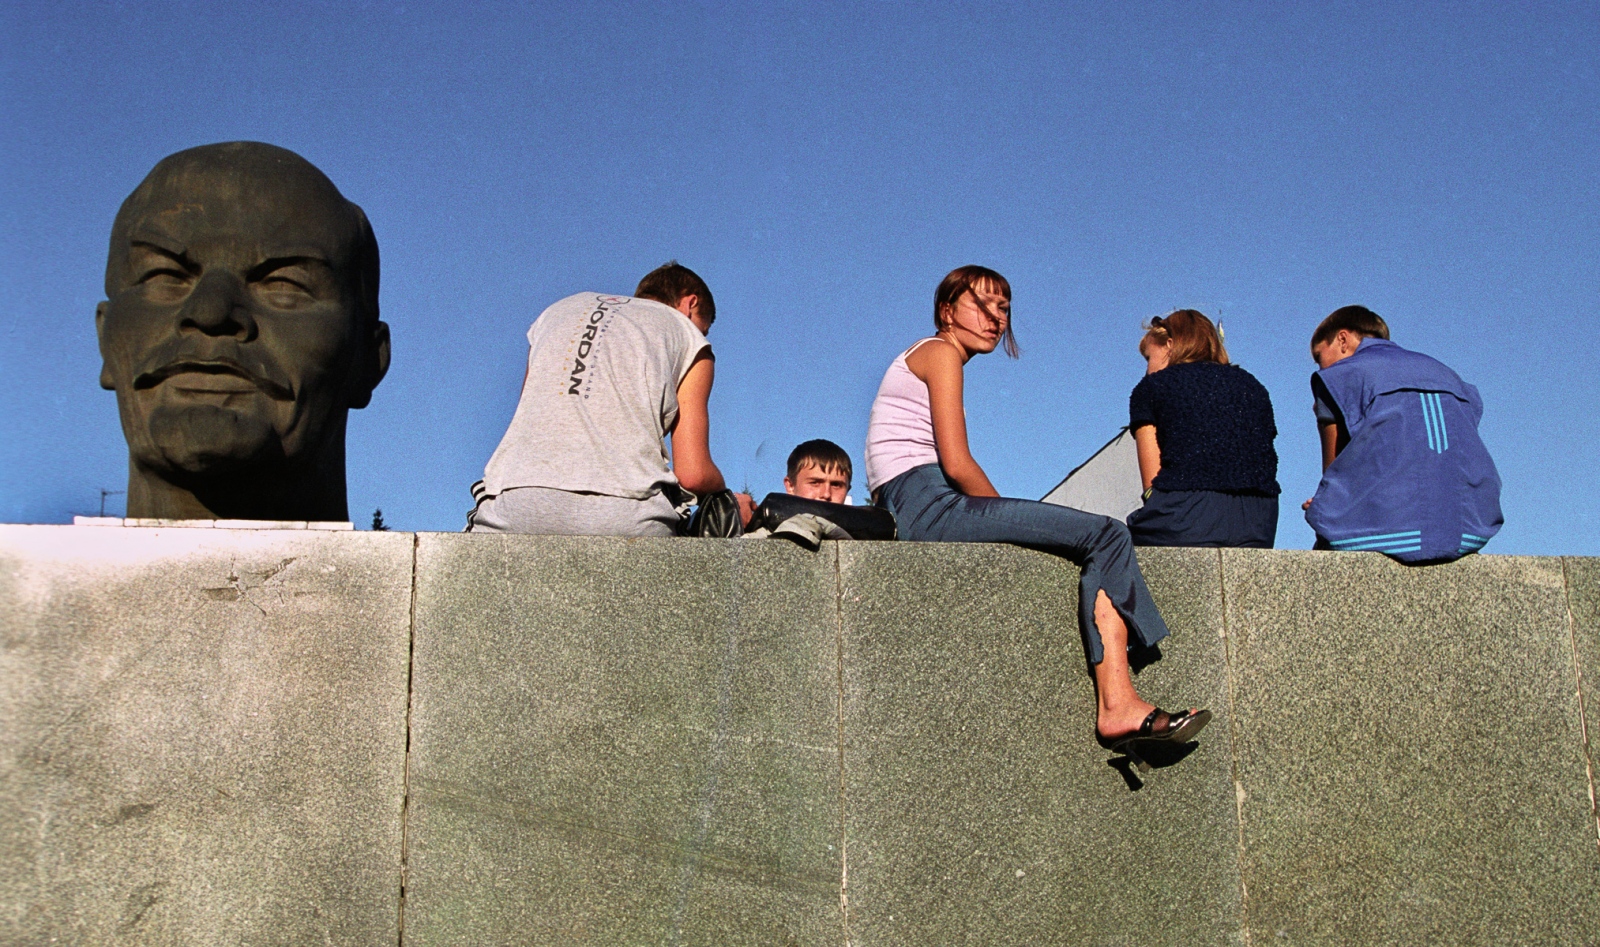 Russia In Transition - 1990s - The bust of Lenin looms over teenagers hanging out at the...